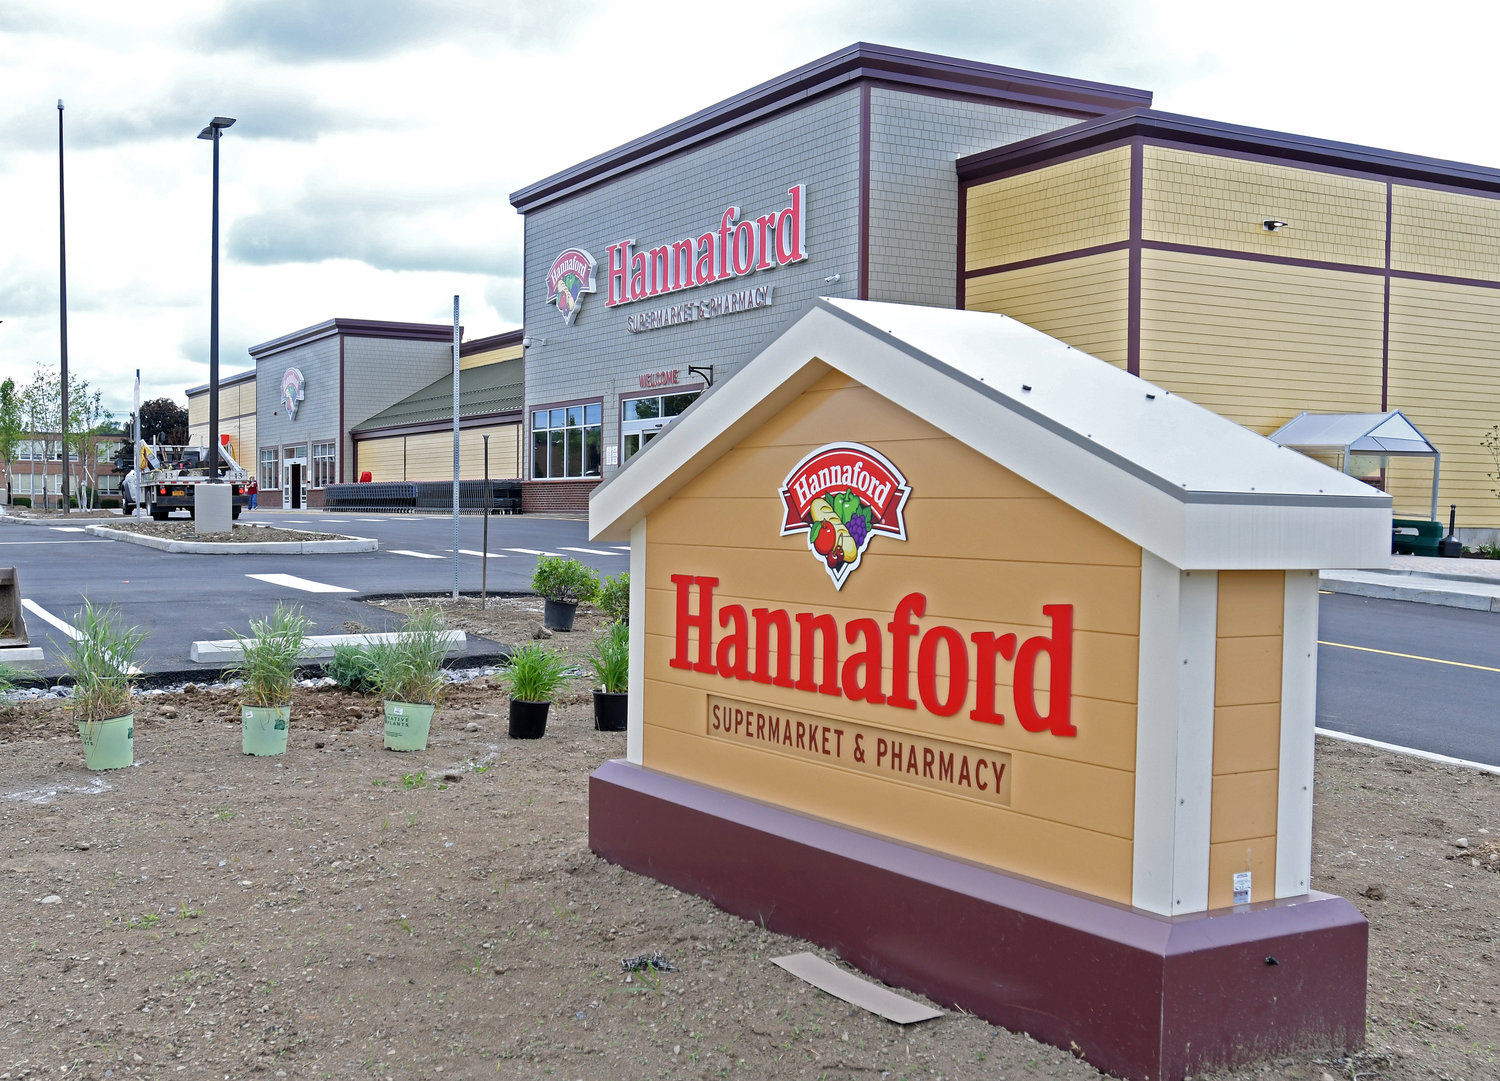 The new Hannaford supermarket at the corner of Turin St and Chestunt Sts Friday morning.